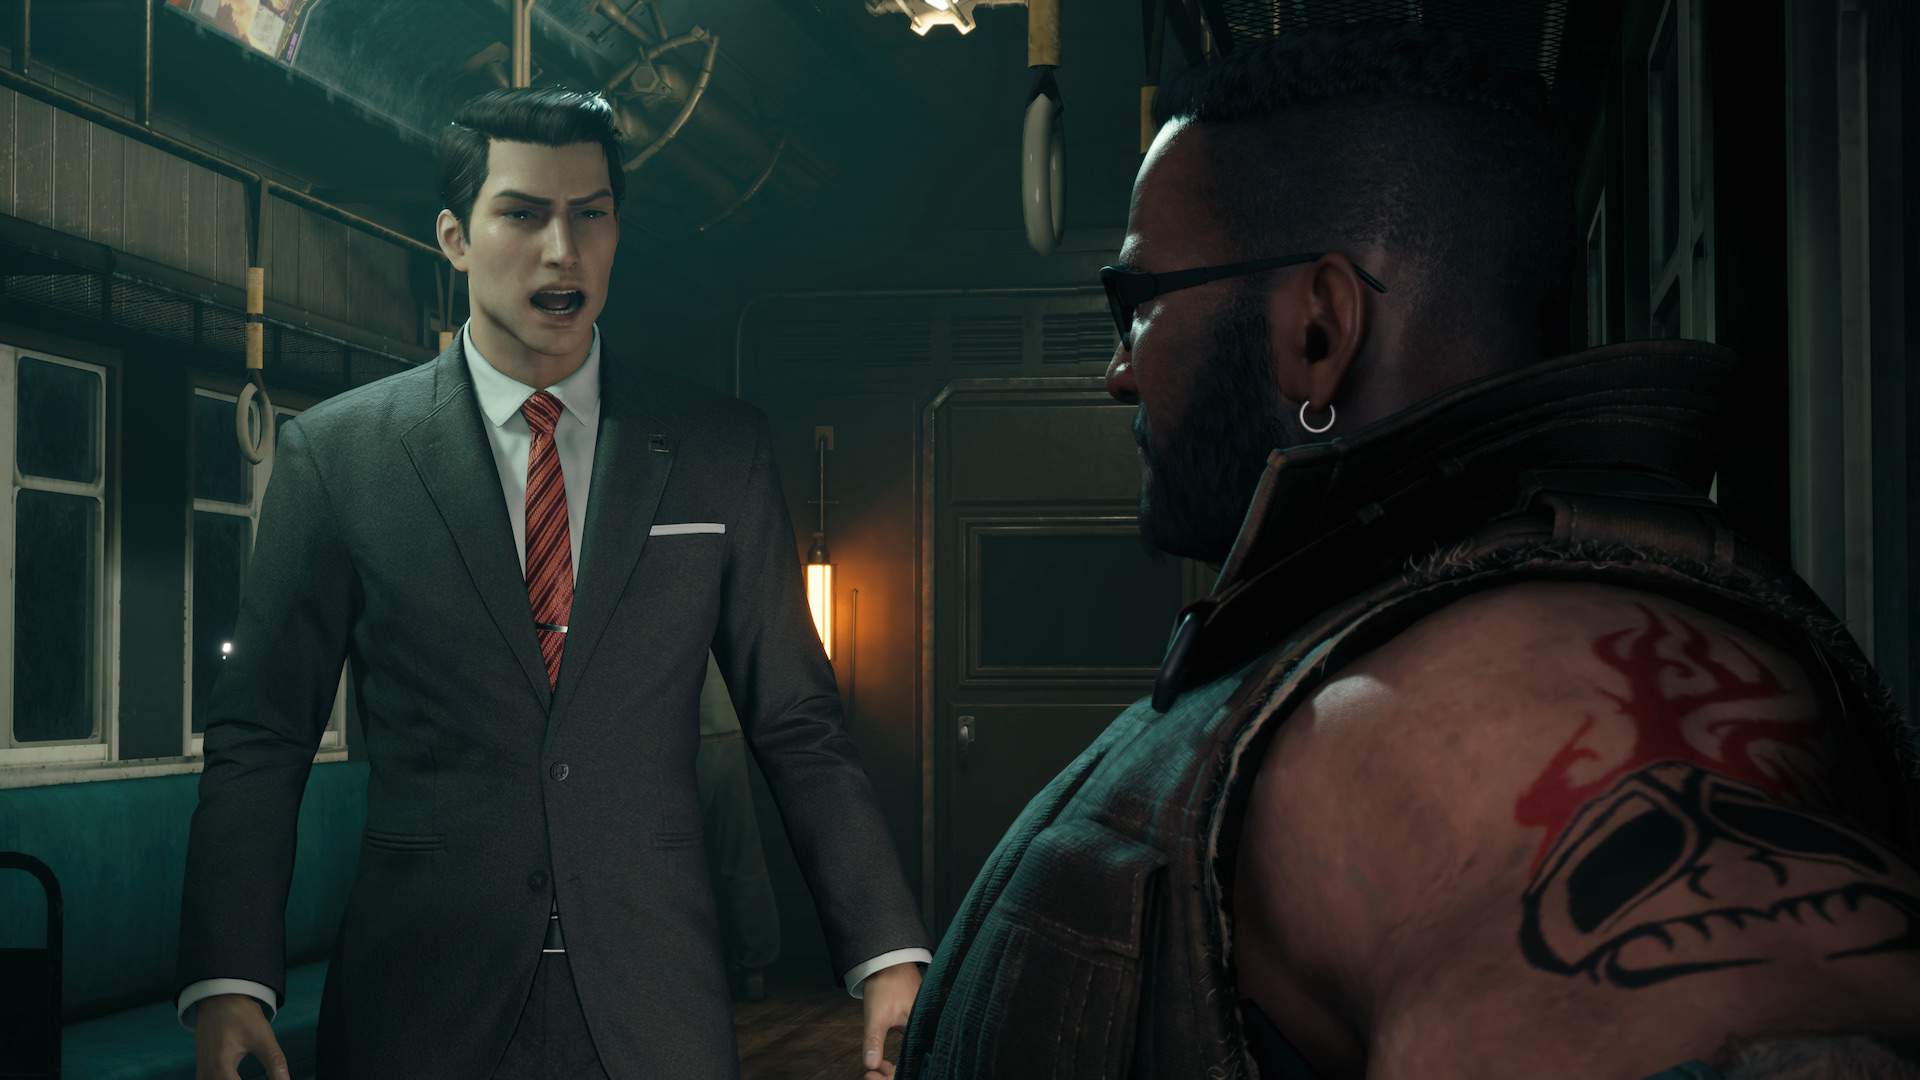 Shinra Middle Manager confronting Barret